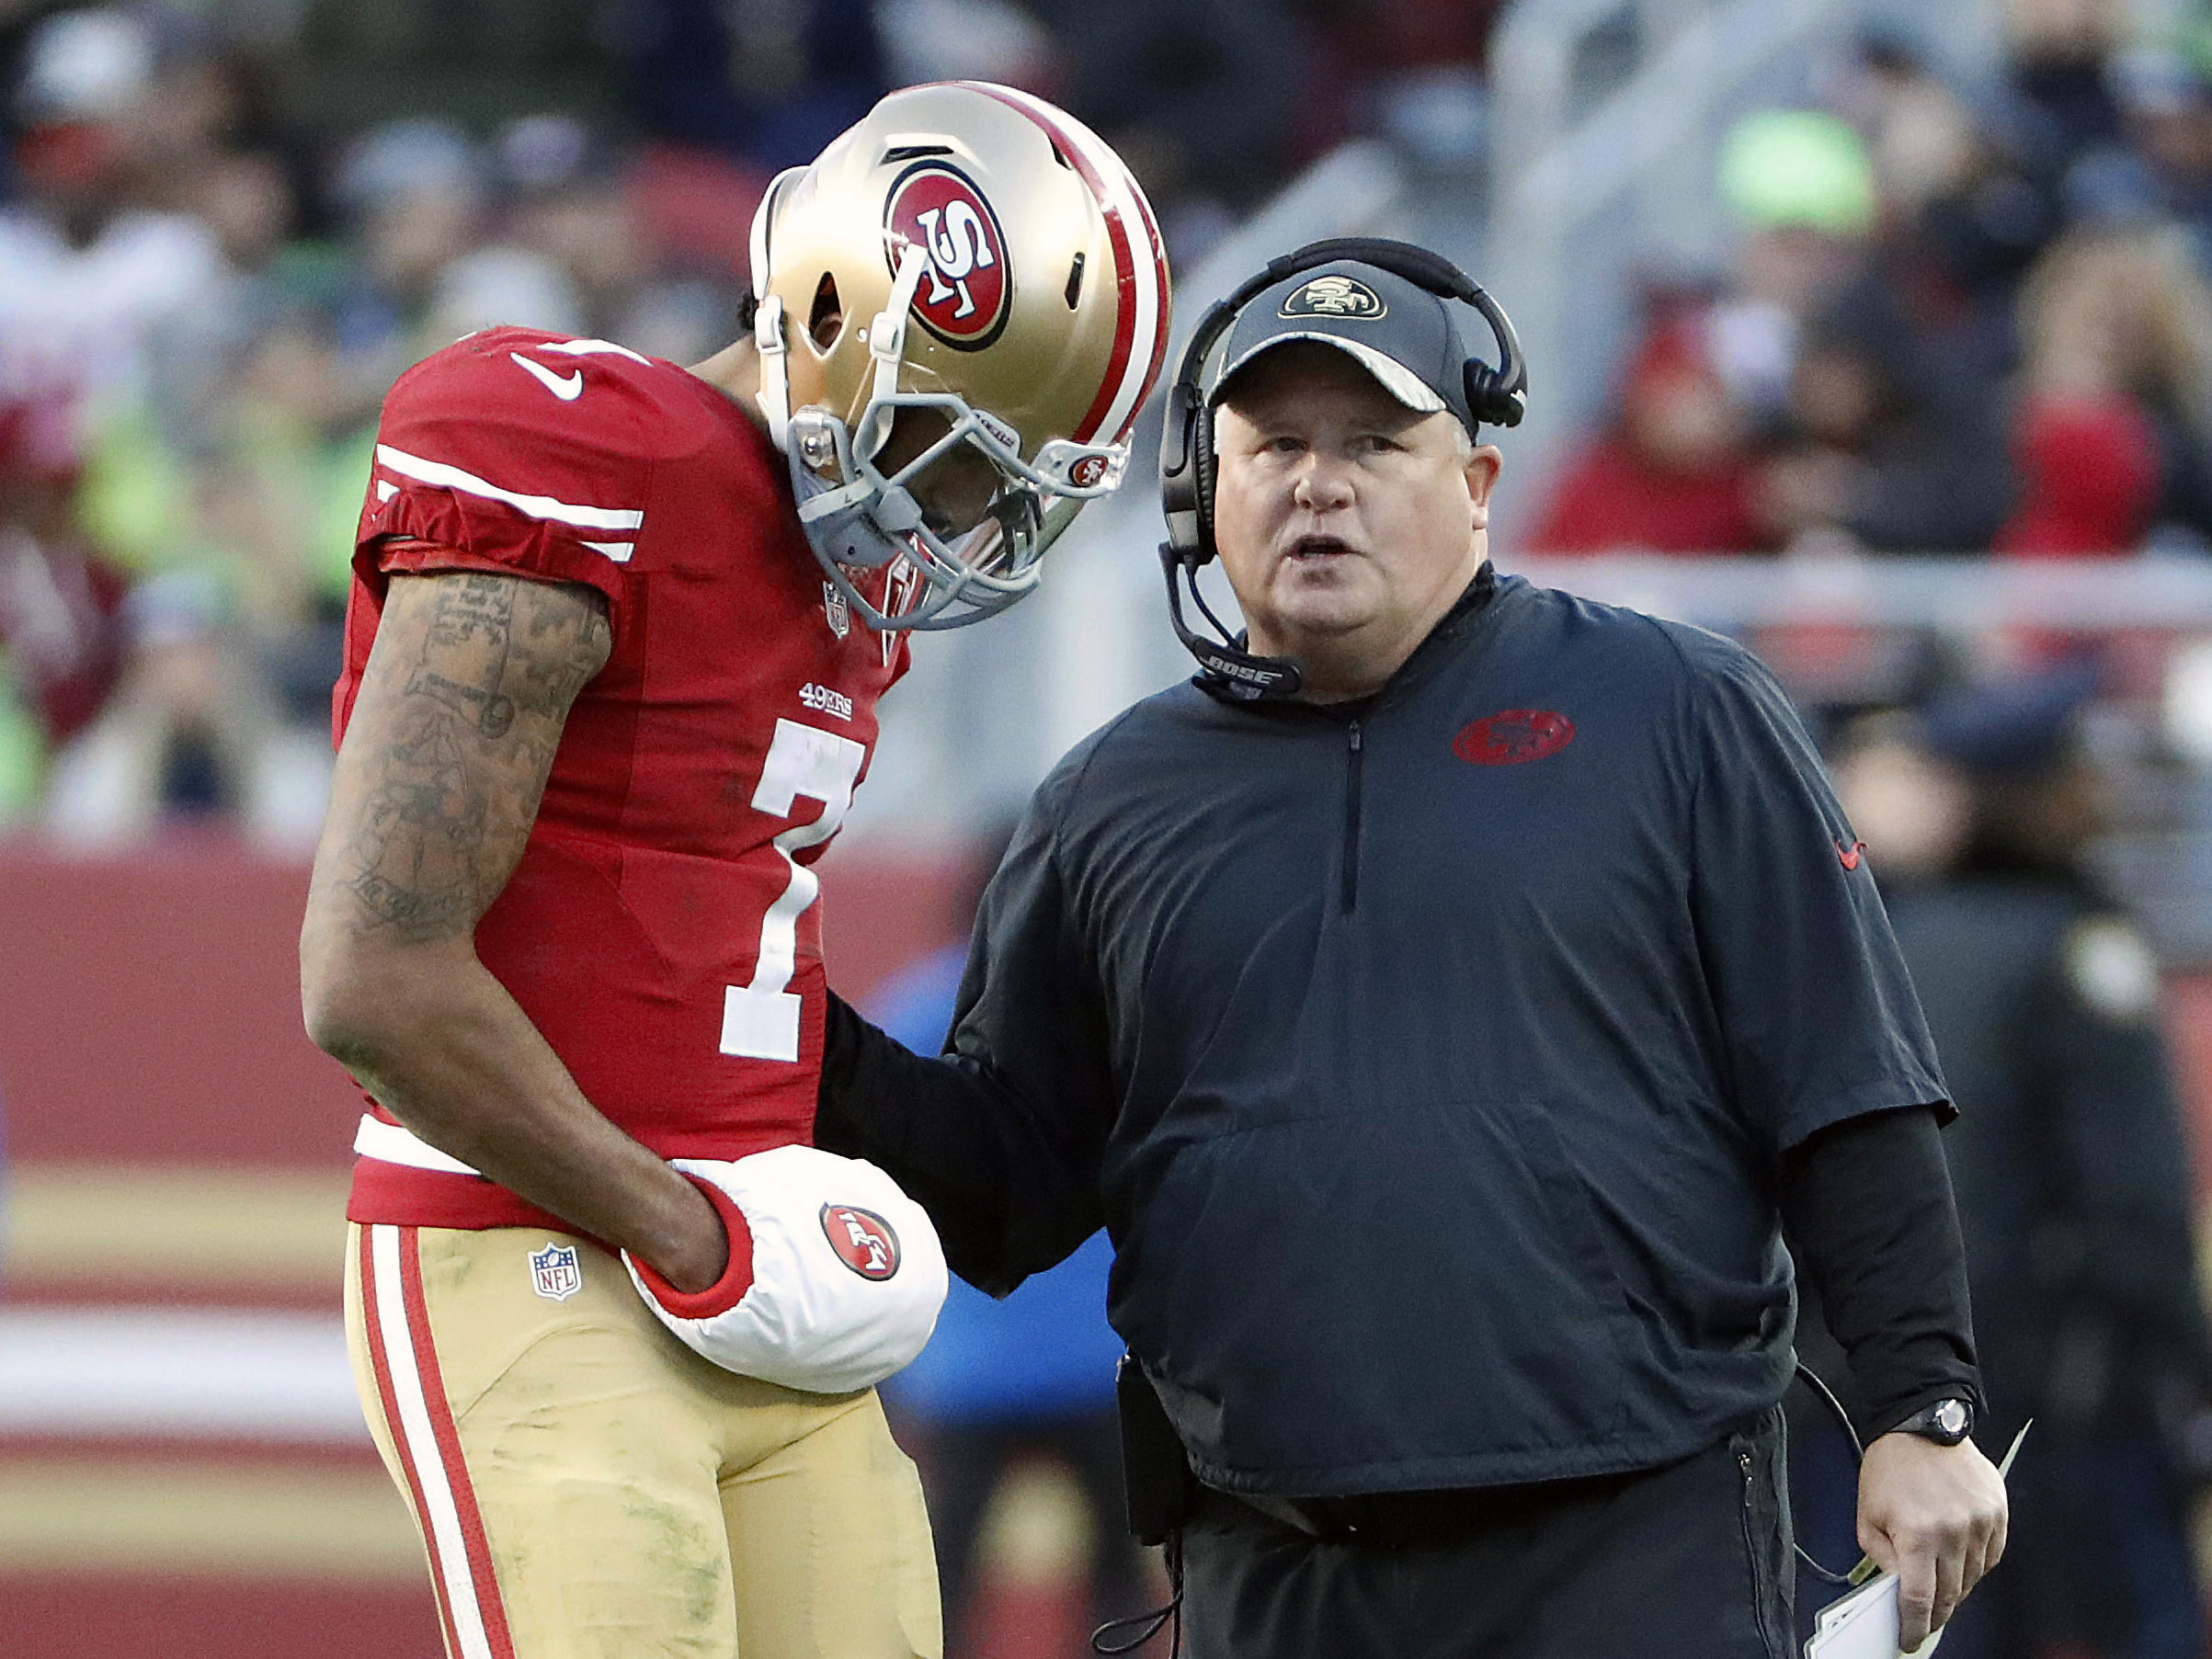 San Francisco 49ers quarterback Colin Kaepernick (7) talks with head coach Chip Kelly during the second half of an NFL football game against the Seattle Seahawks in Santa Clara, Calif., Sunday, Jan. 1, 2017.